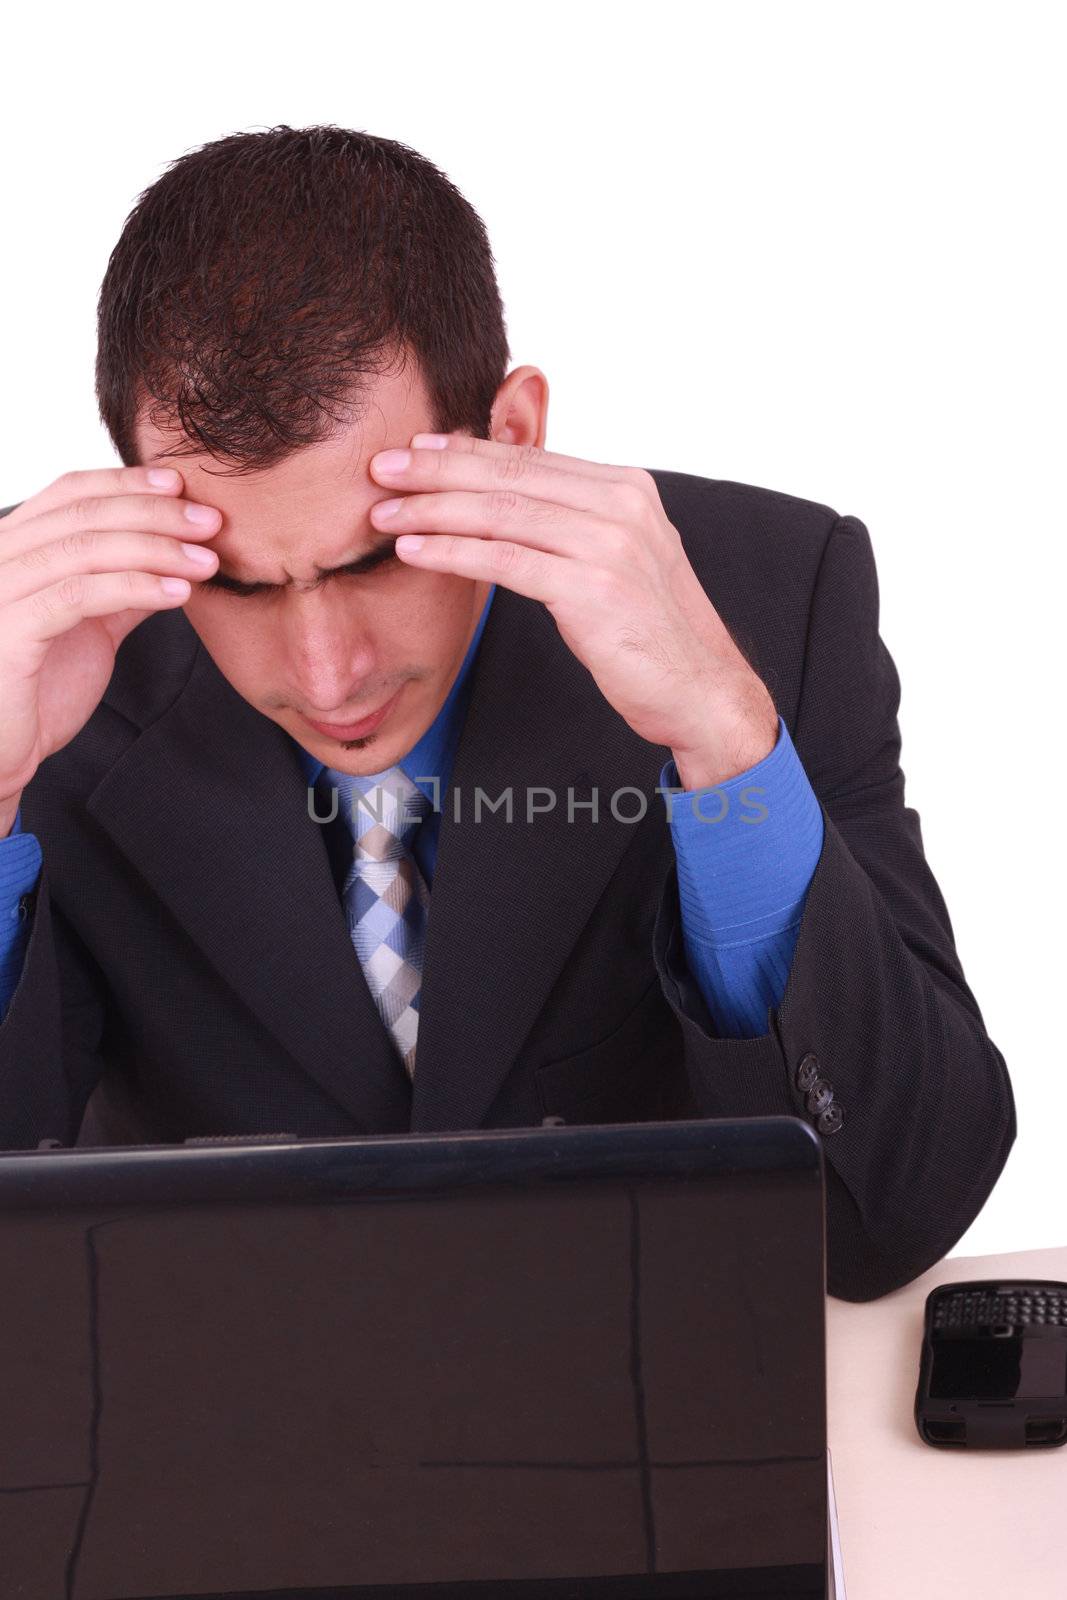 Image of businessman touching his head while looking at monitor with tired expression